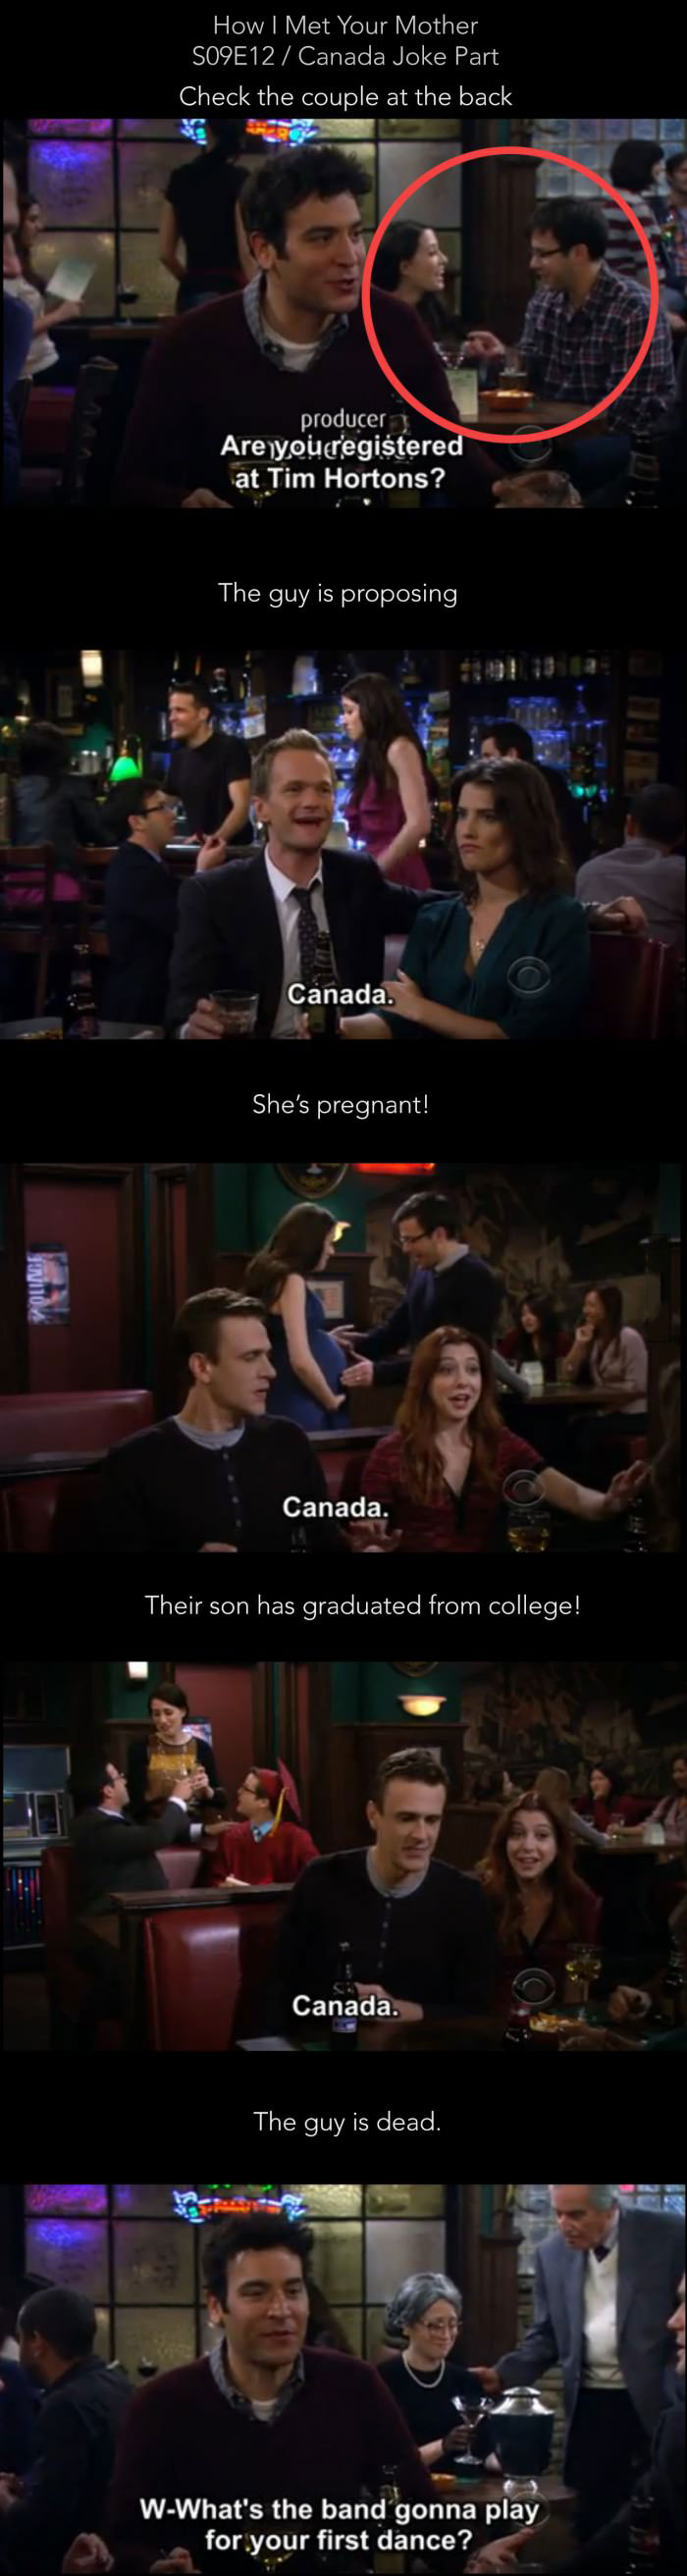 himym, canada, couples in the background, tv show